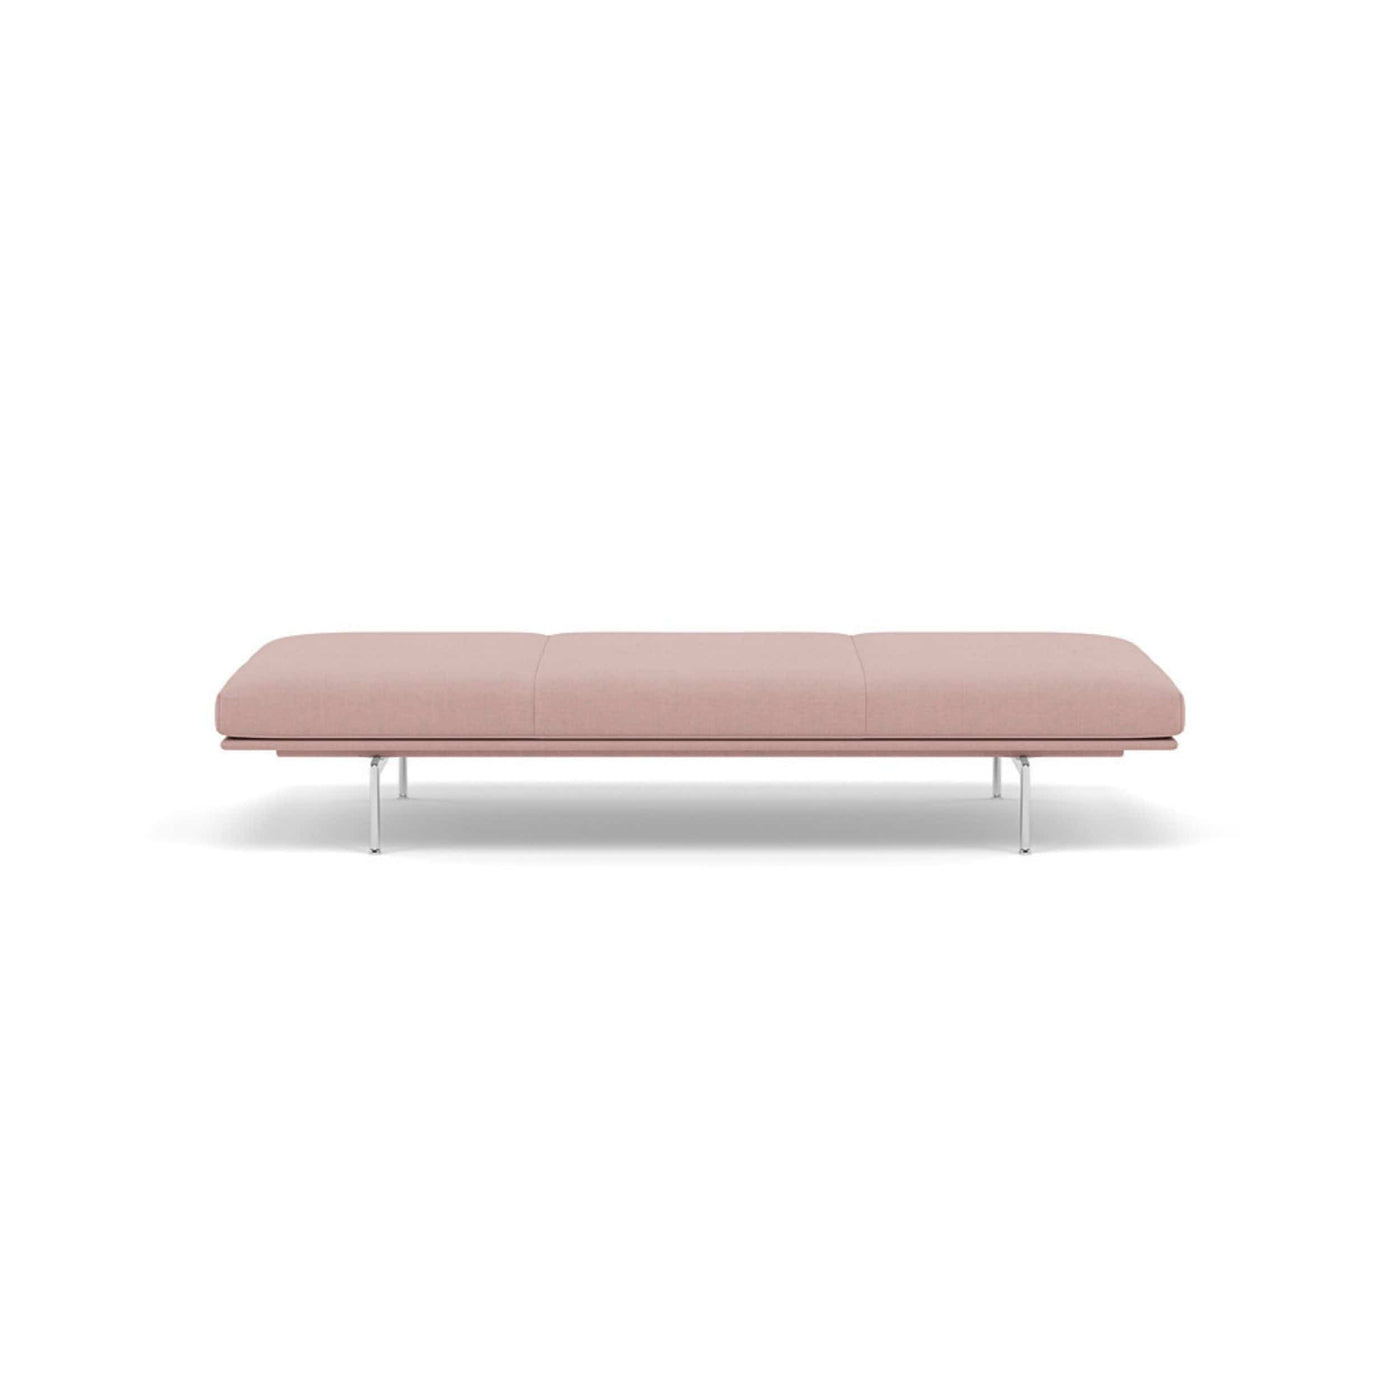 muuto outline daybed in fiord 551 pink fabric and polished aluminium legs. Made to order from someday designs. #colour_fiord-551